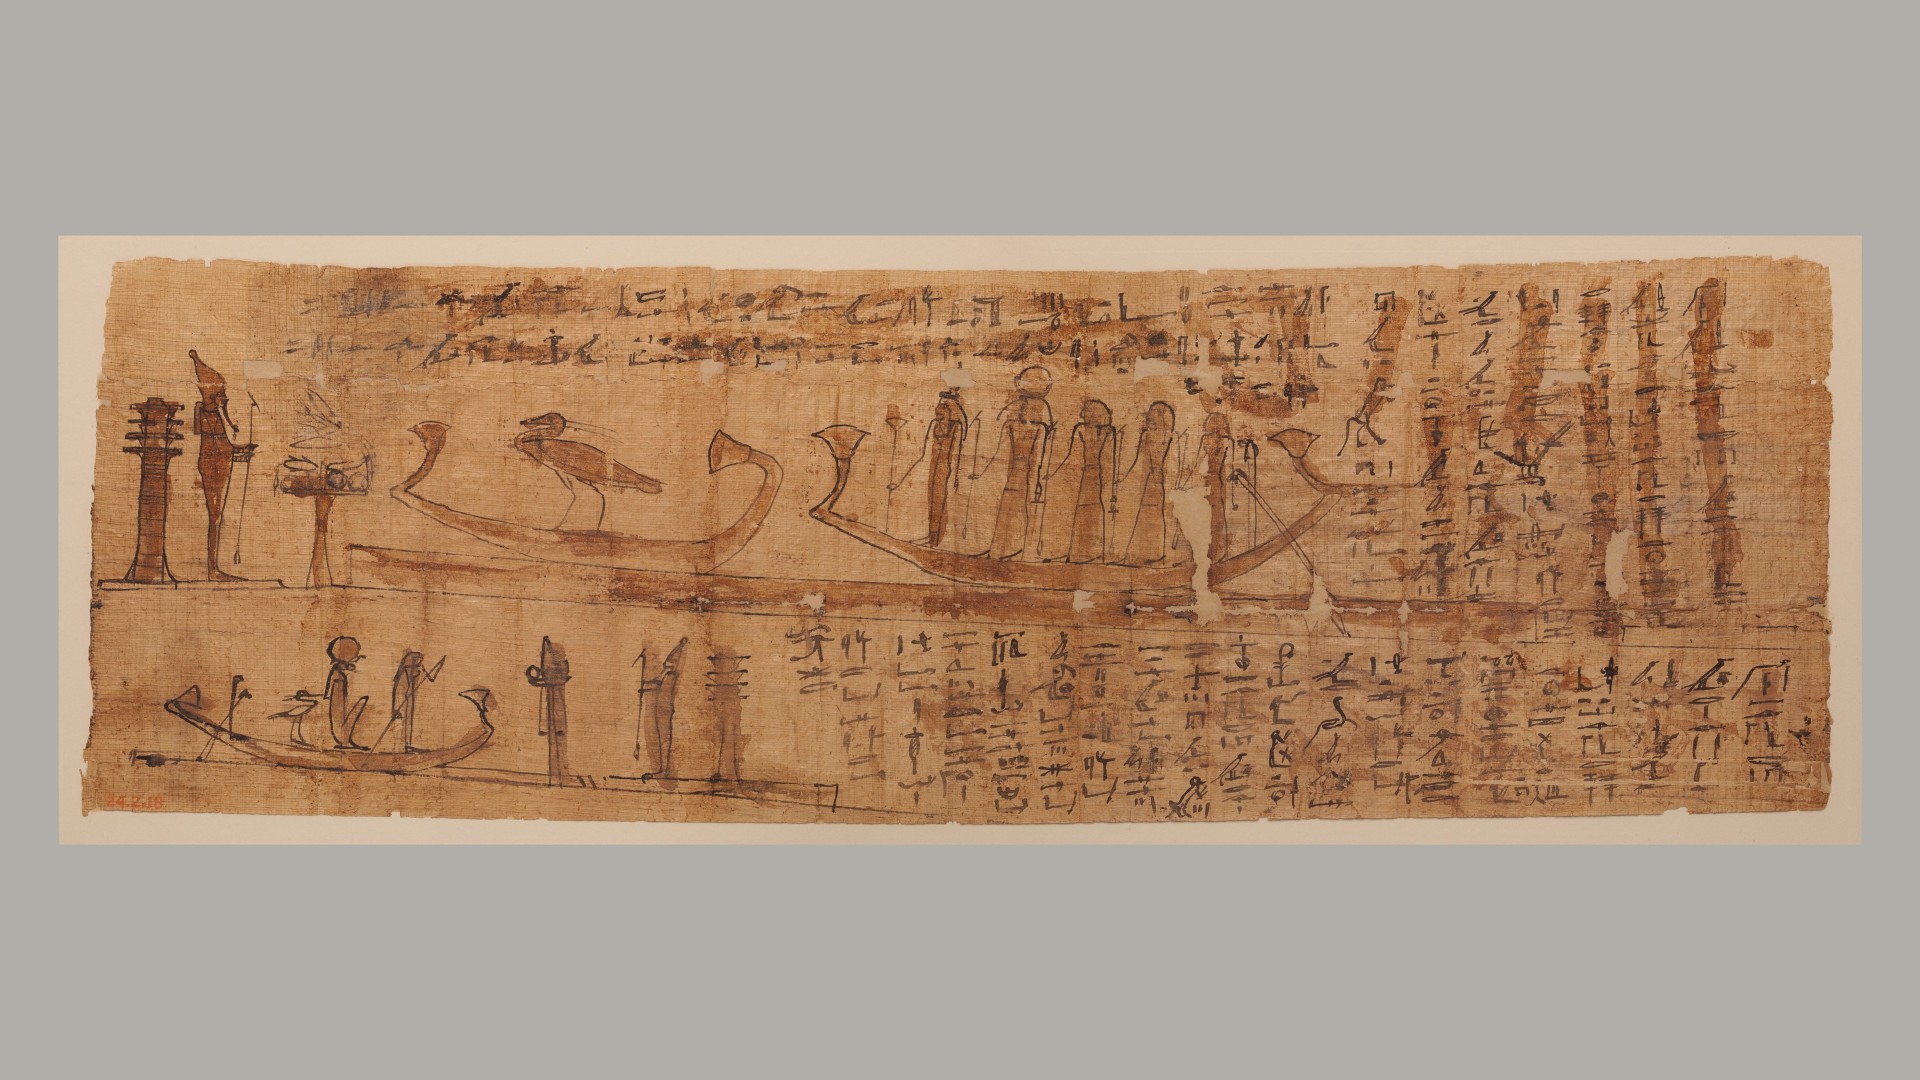 Book of the Dead Papyrus with Chapters 100 and 129. On the top are the text and vignette for spell 129. At the left of the vignette is the god Osiris holding a was-scepter; behind him stands a large djed-pillar. In front of the god is an offering table with food topped by a large lotus flower. Farther to the right is a long and low rectangle, which is presumably depicting water; on top of it are two boats. In the left one is the phoenix, while five deities stand in the right one. The lower part of the papyrus features spell 100. This time, Osiris is depicted on the right side, again with a djed-pillar behind him. In front of the god is the emblem for the east, and to the left of this is a boat being punted by a woman (the deceased) with a long oar. Behind her sits the sun god and then the phoenix.